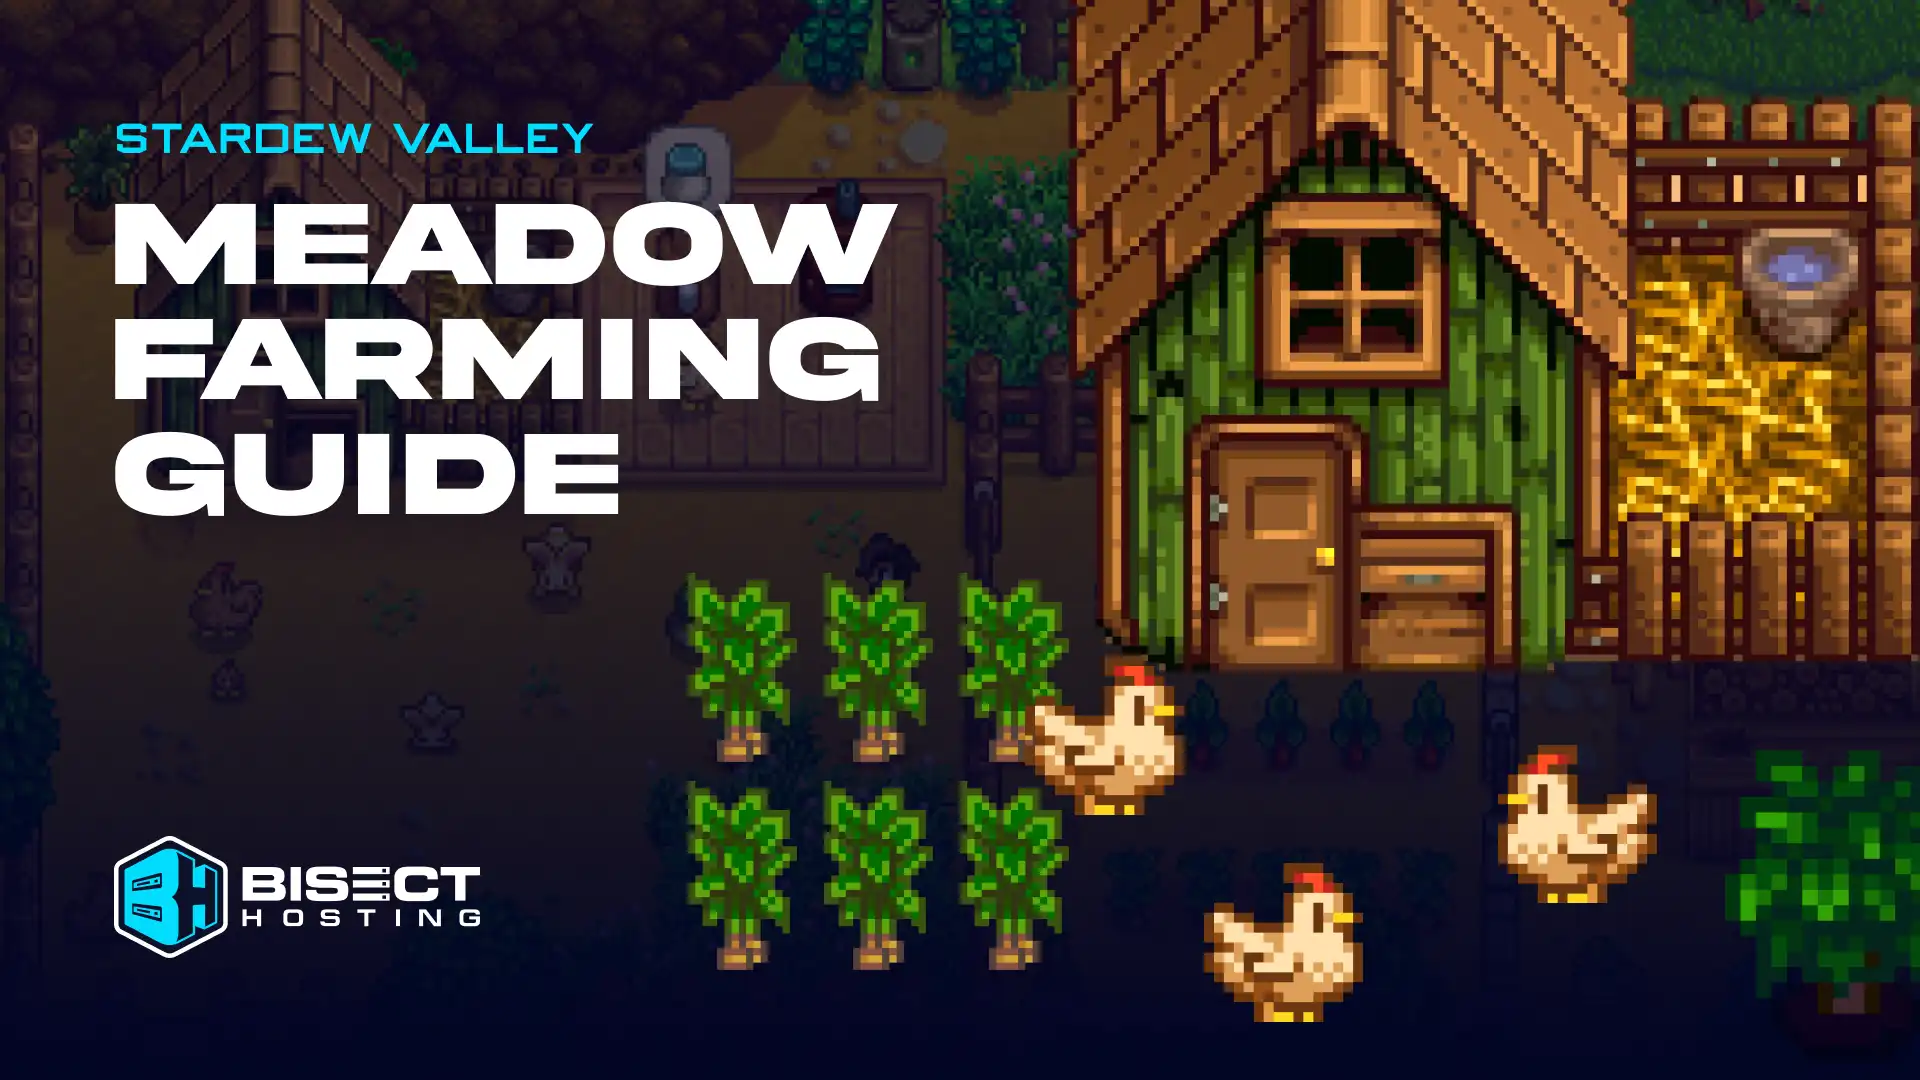 Stardew Valley Meadowlands Farm Guide: Farm Layout, Blue Grass, & More